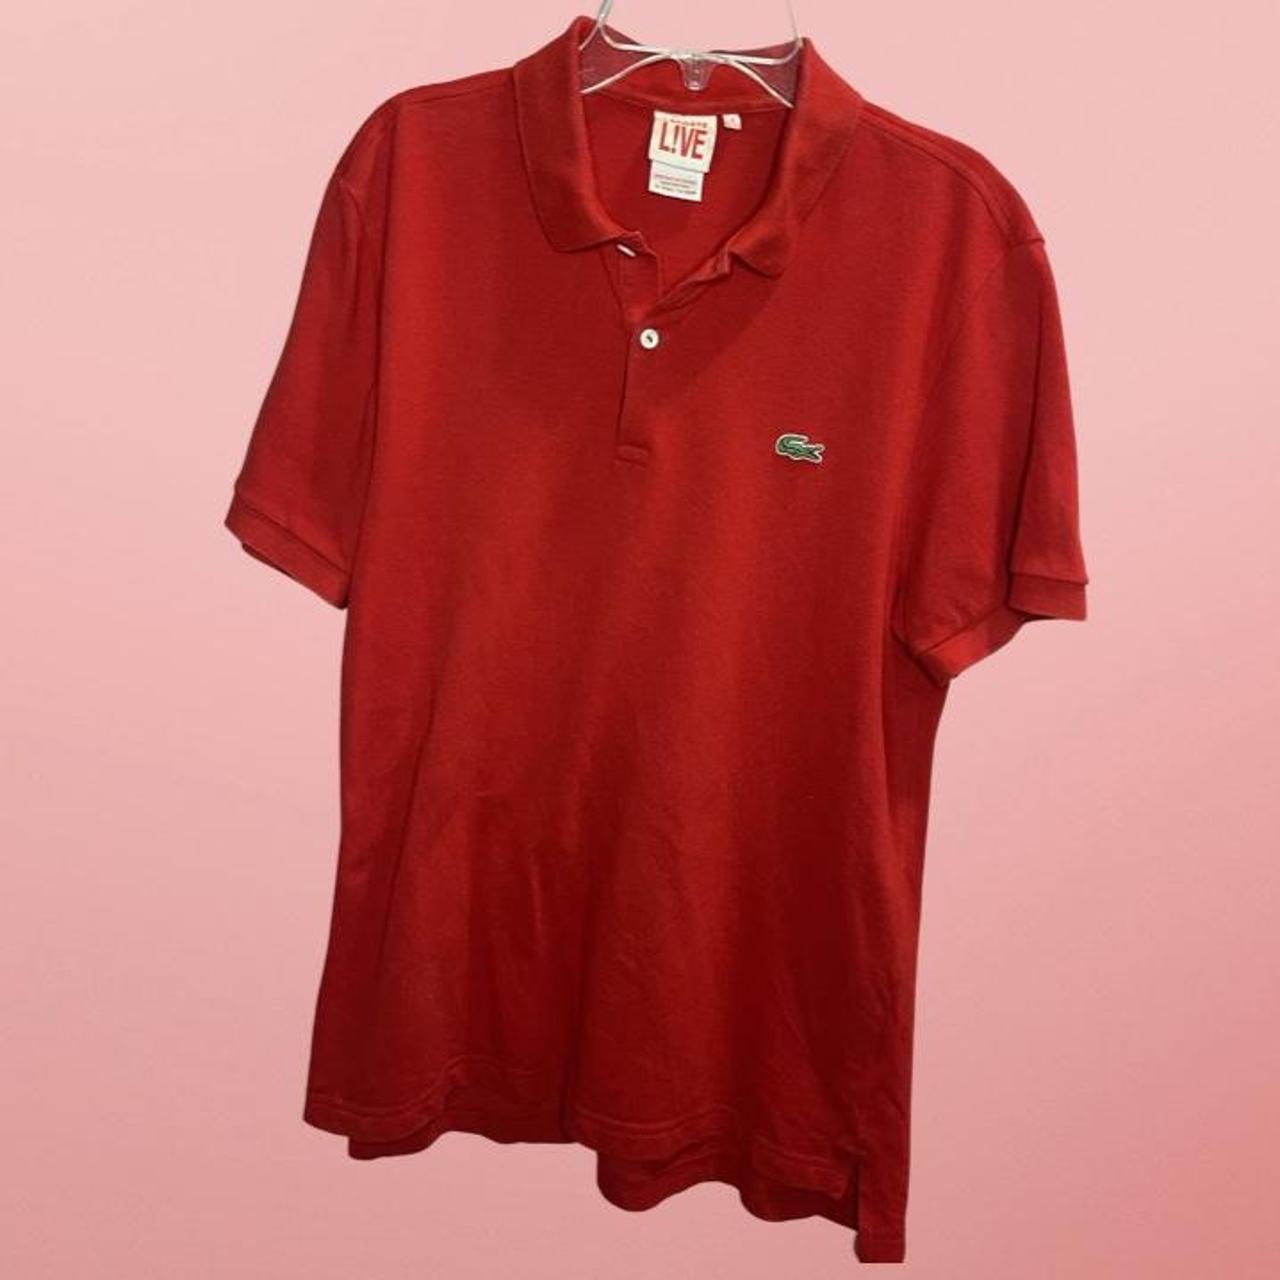 Lacoste Live Women's Red Polo-shirts